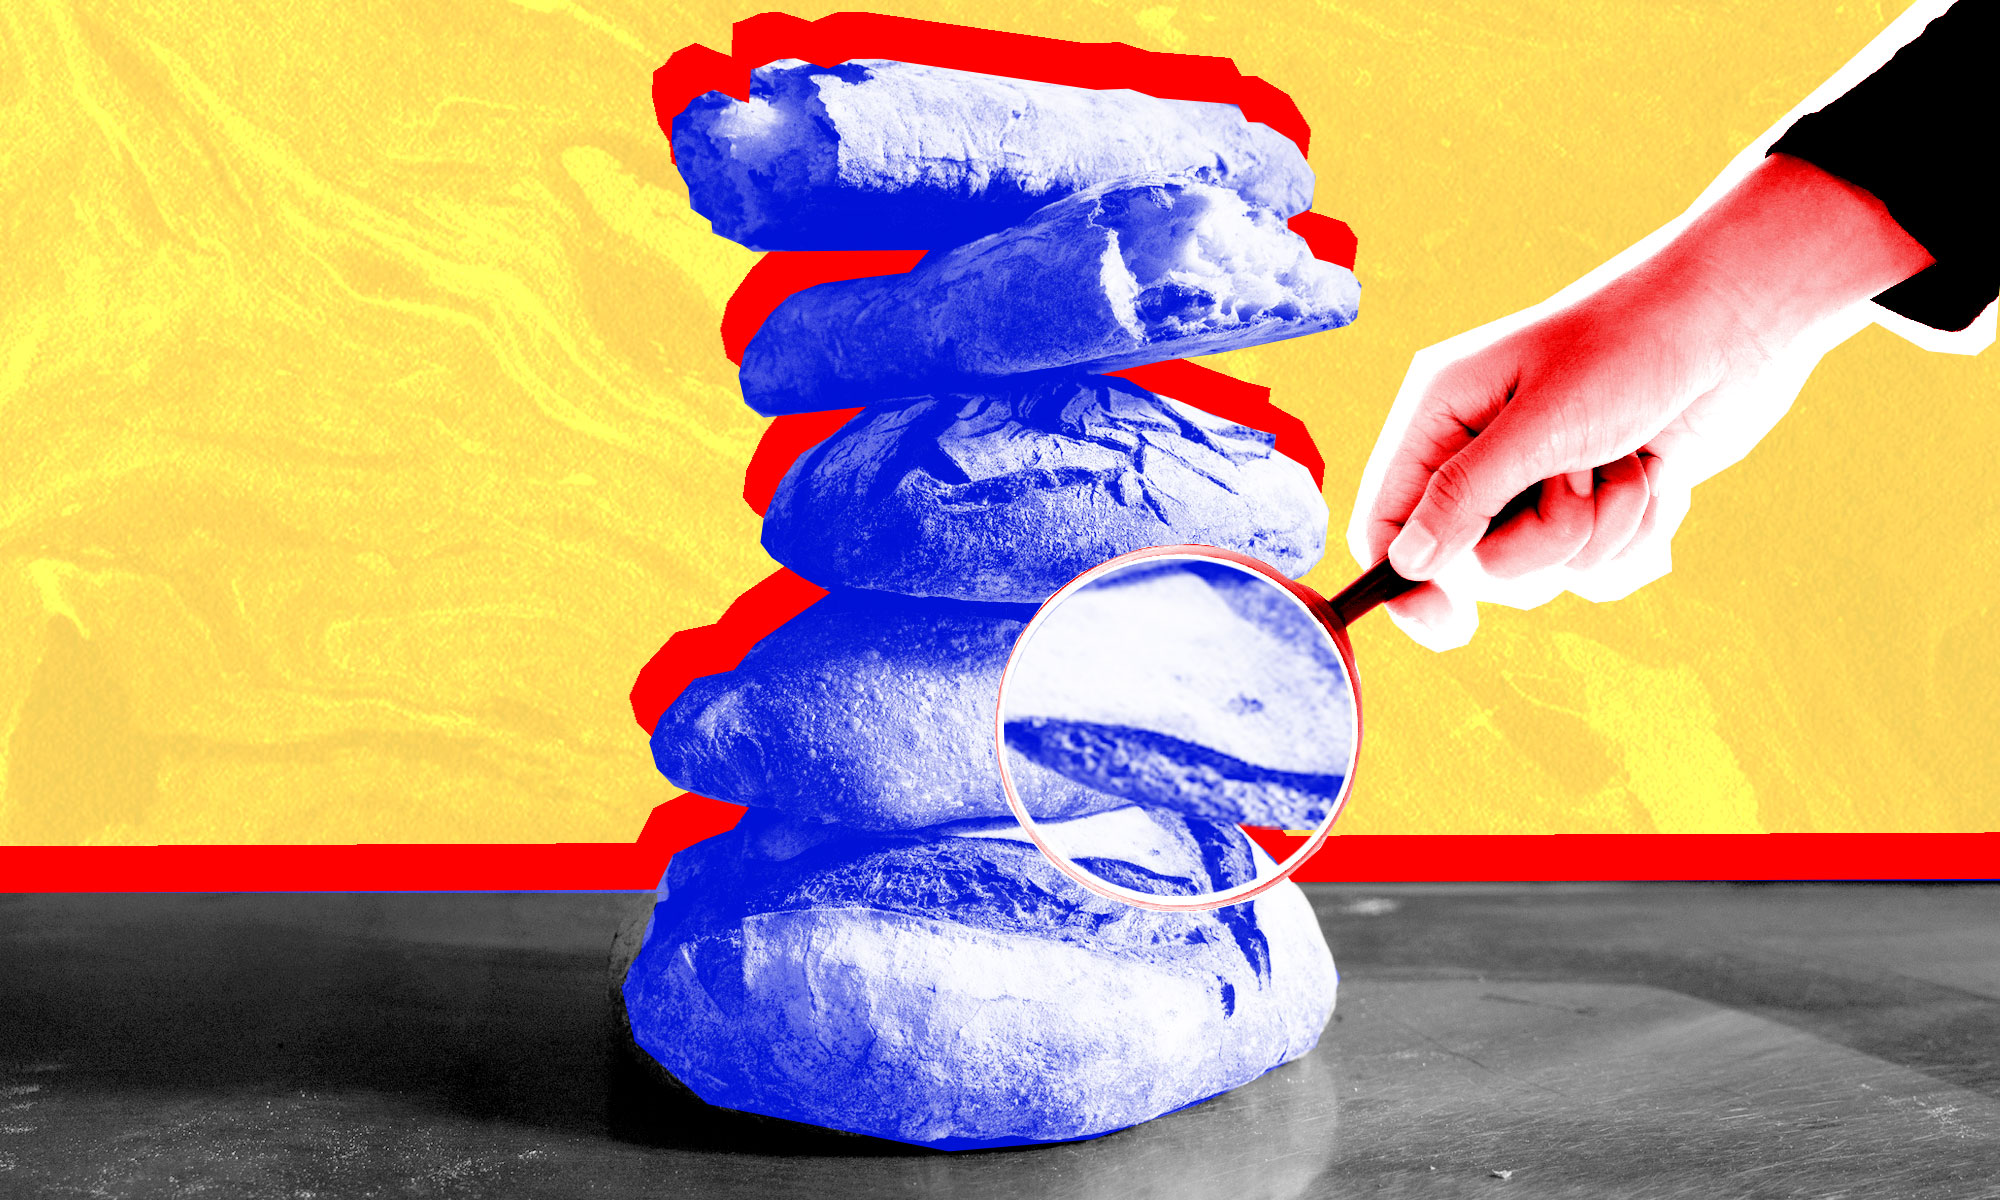 Five loaves of bread stacked atop each other, with a hand holding up a magnifying glass to the stack.